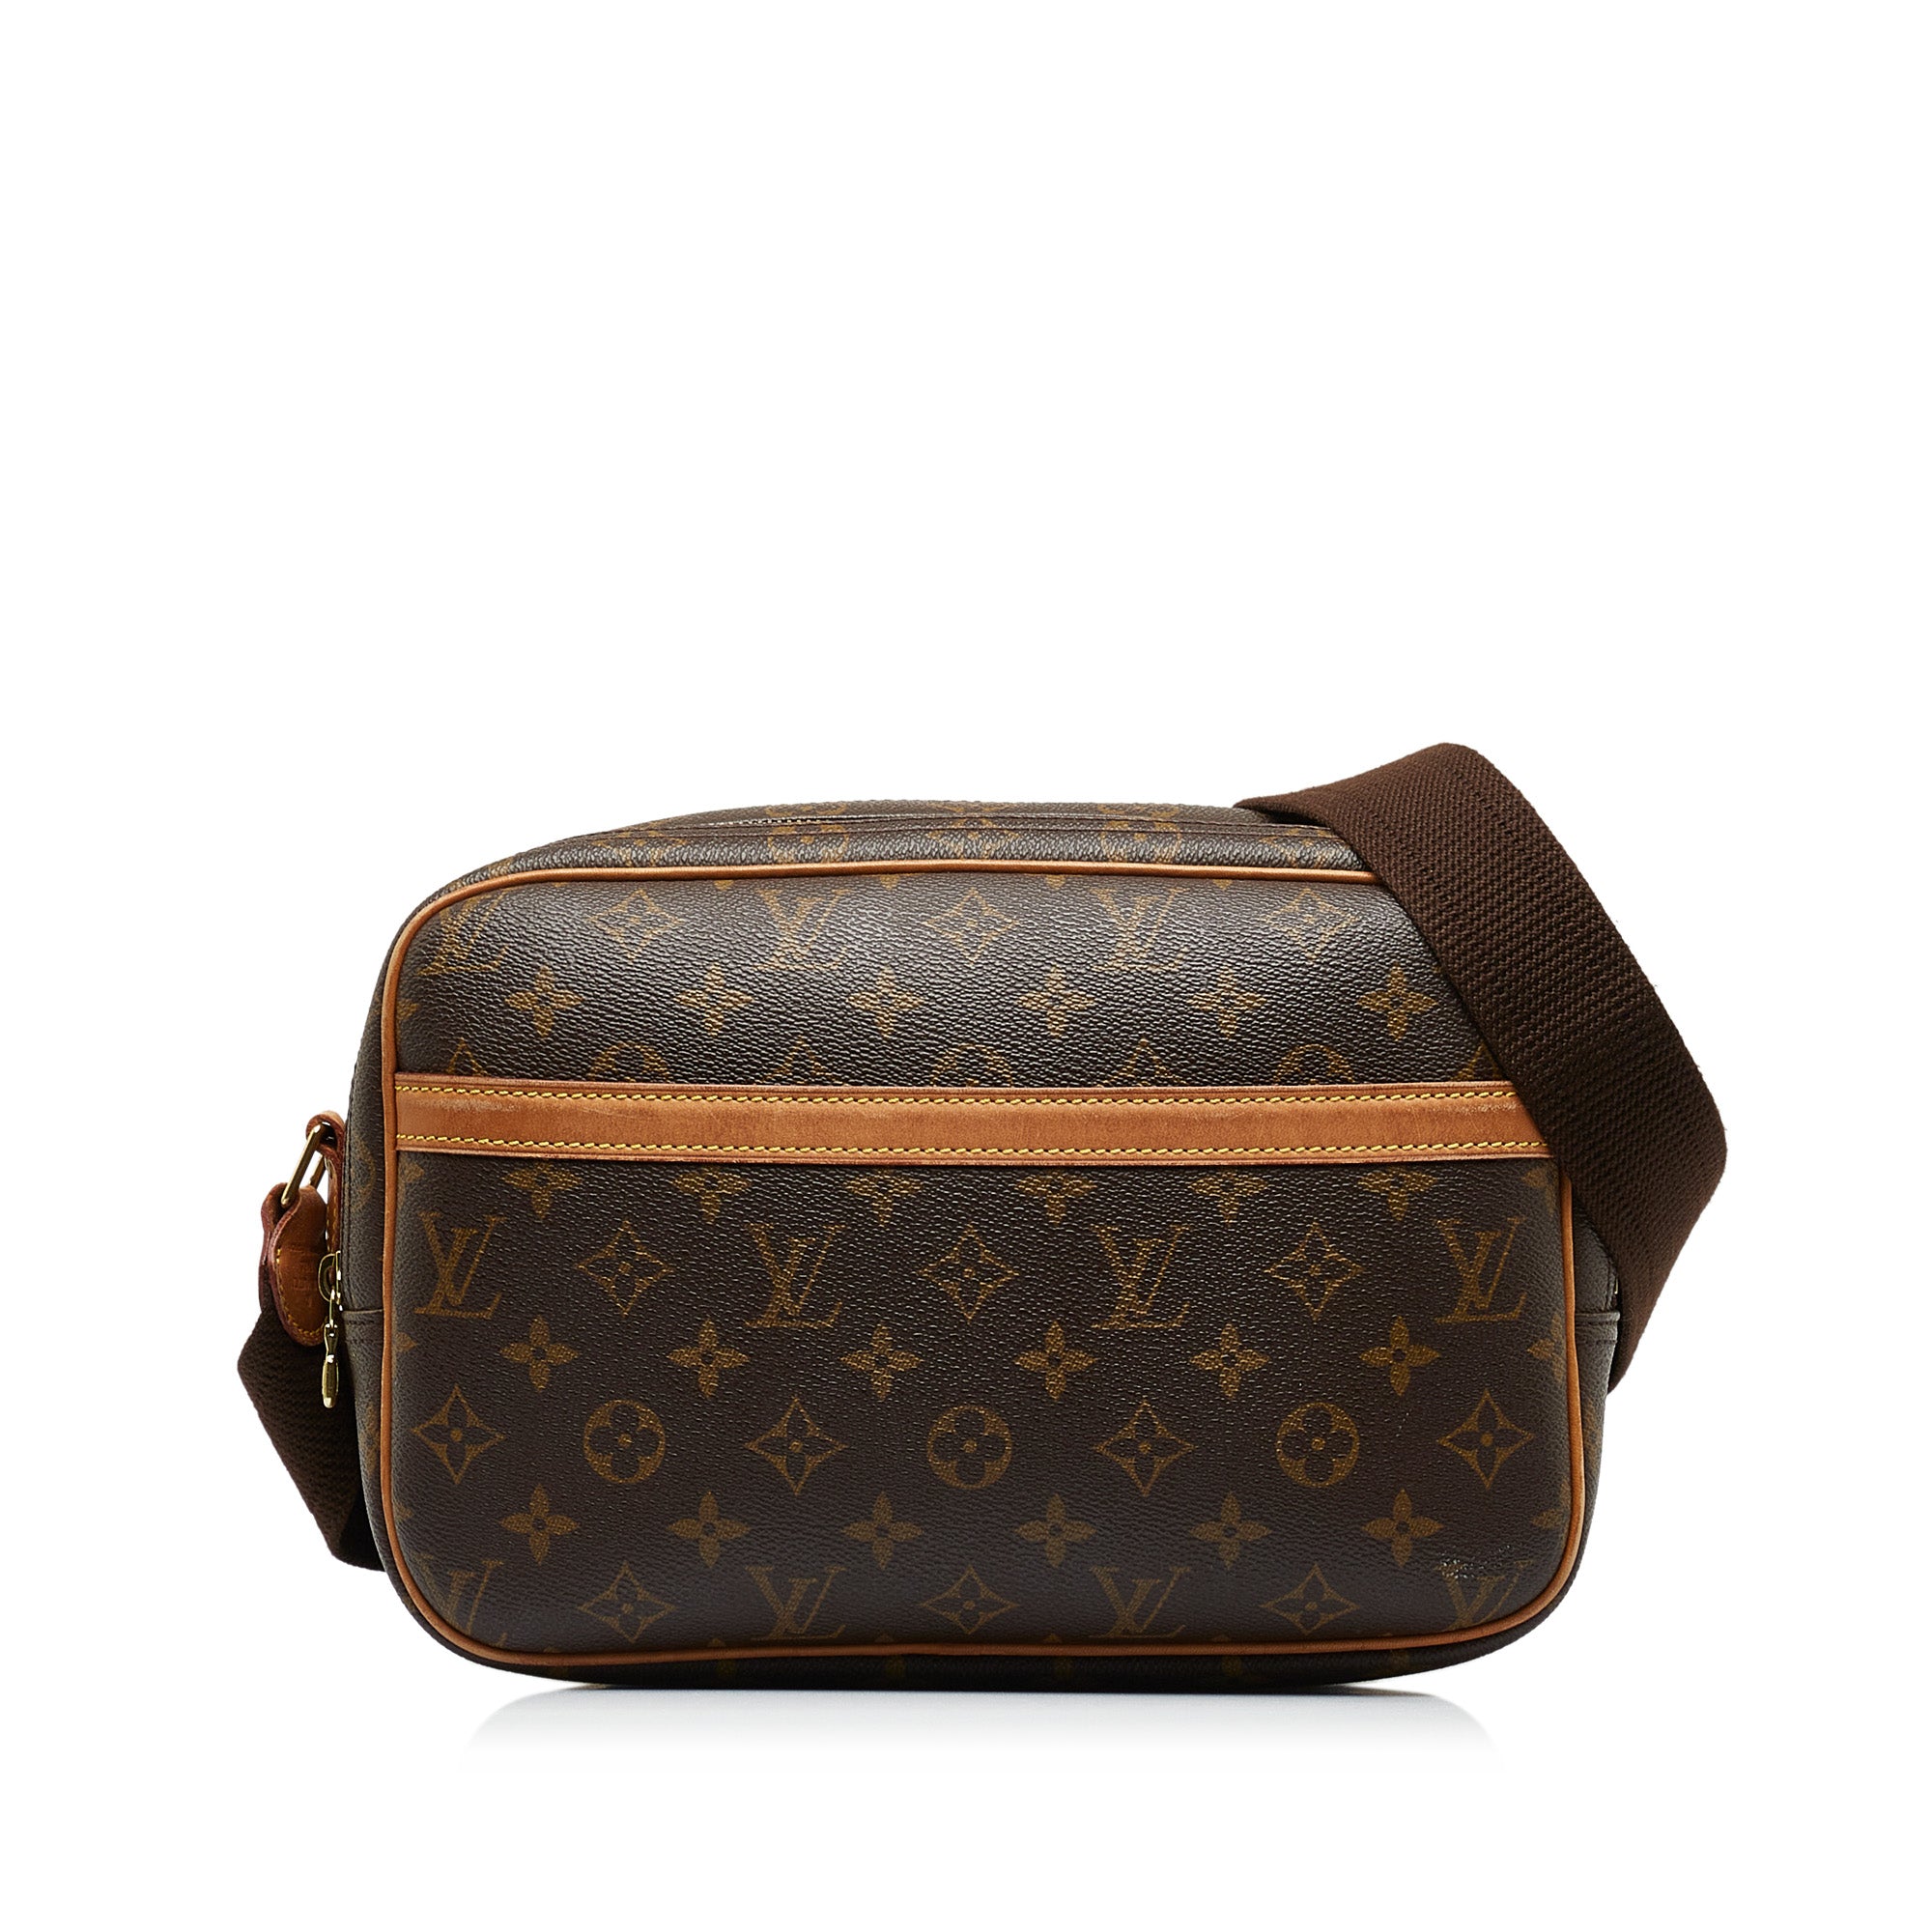 Louis Vuitton Monogram Reporter PM Crossbody just in! Call us at